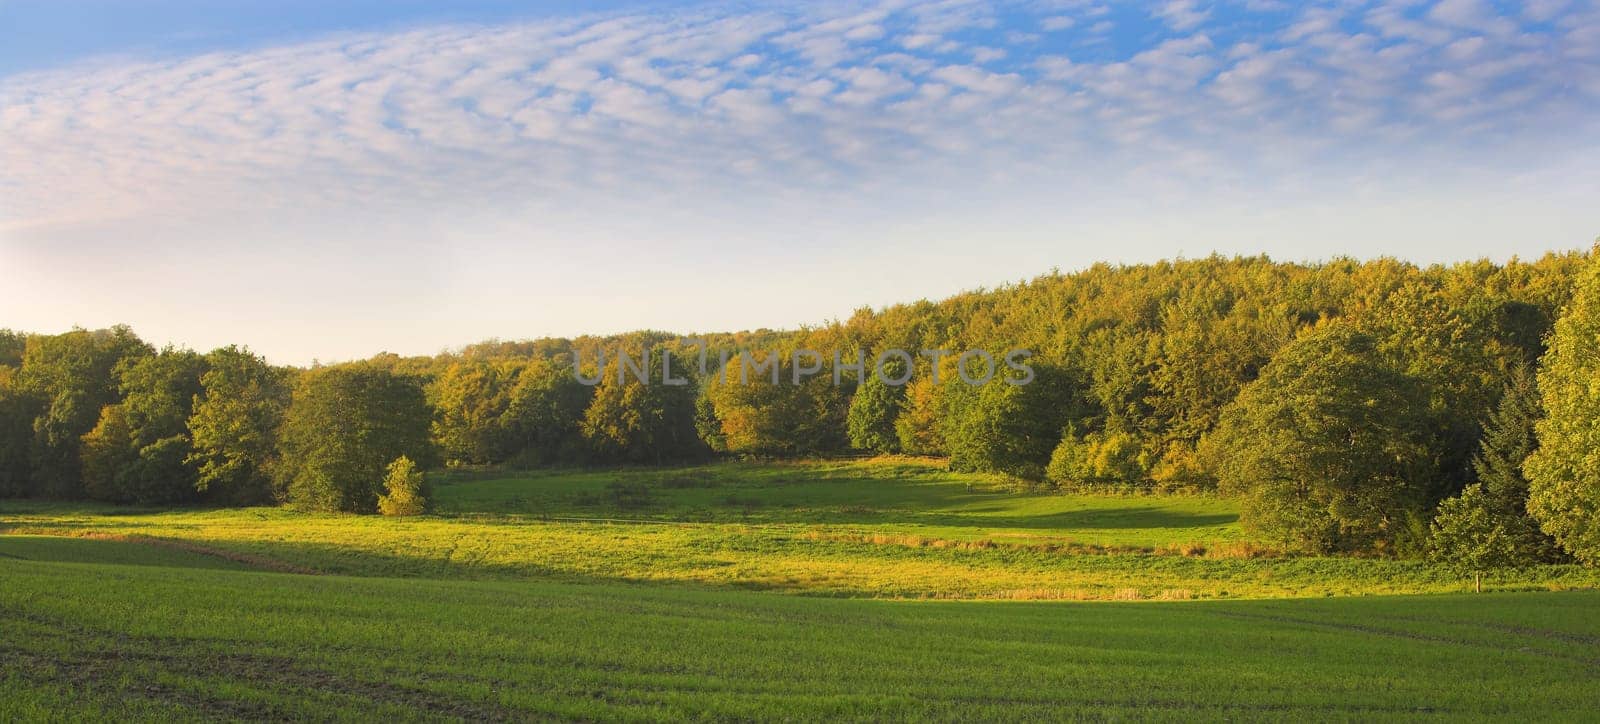 Landscape, nature and travel in countryside, trees in meadow or field in Germany with ecology, growth and sustainability. Eco, location and natural background with farming and land for biodiversity by YuriArcurs